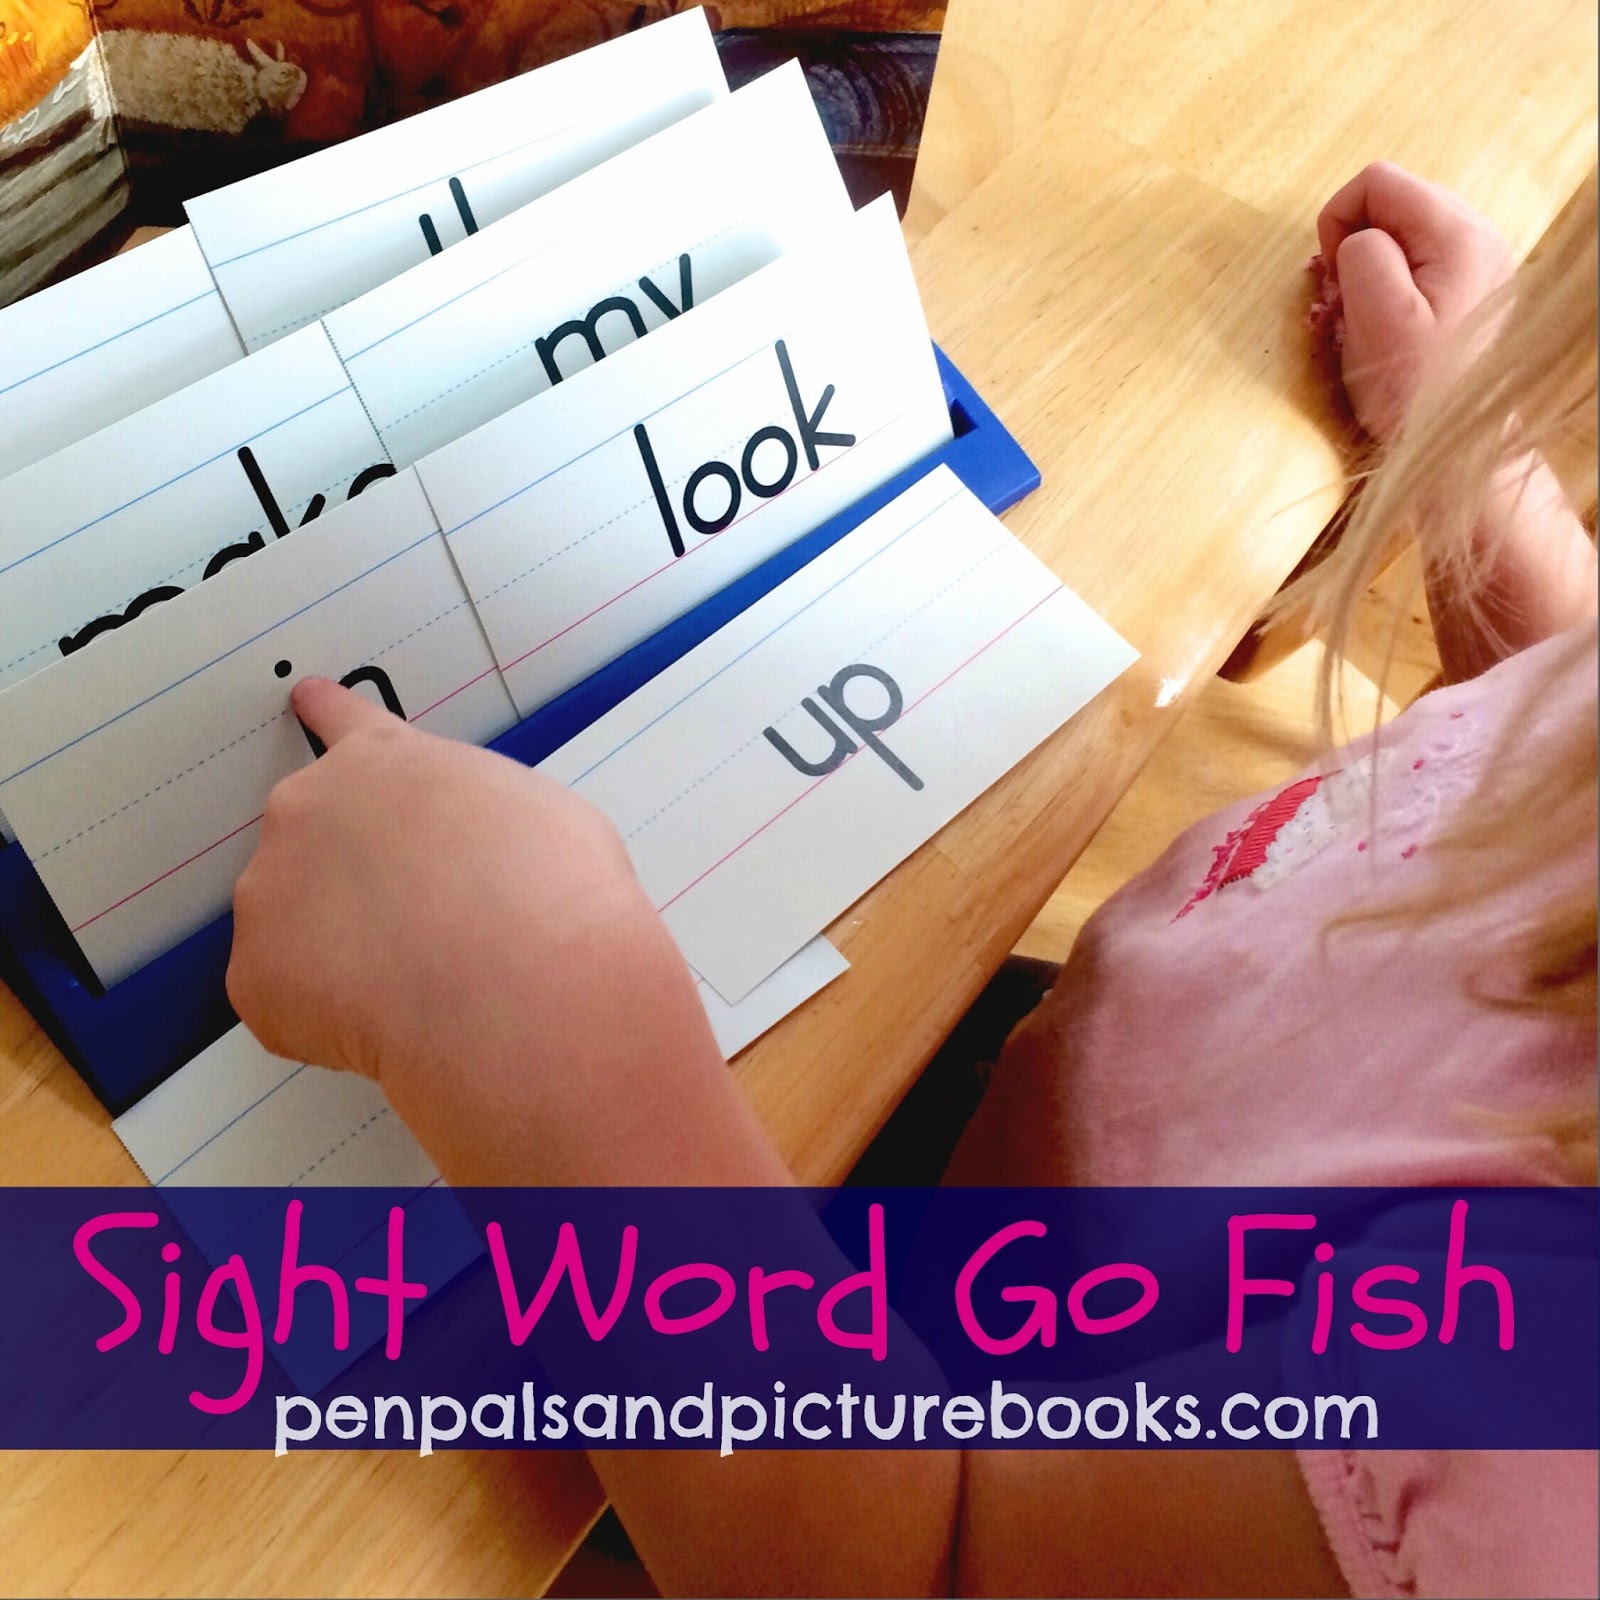 word Picture book Fish went sight Sight  Go Books: & Pals Pen Word